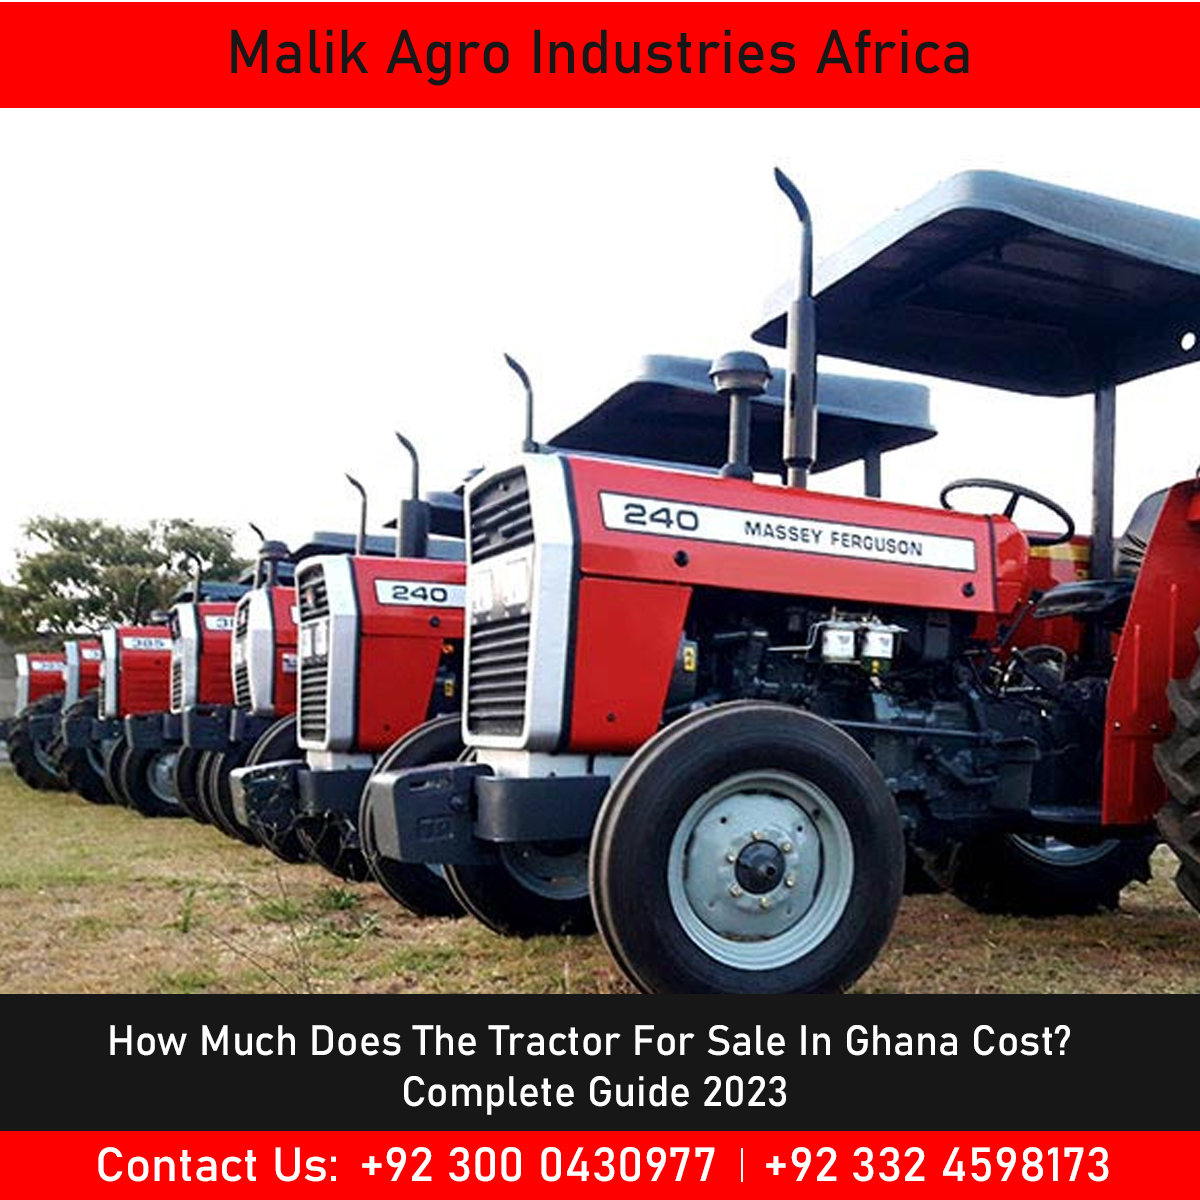 Looking to buy a tractor in Ghana? Discover the cost of tractors for sale in Ghana, factors affecting pricing, and financing options. Uncover the ideal tractor for your precise agricultural needs.